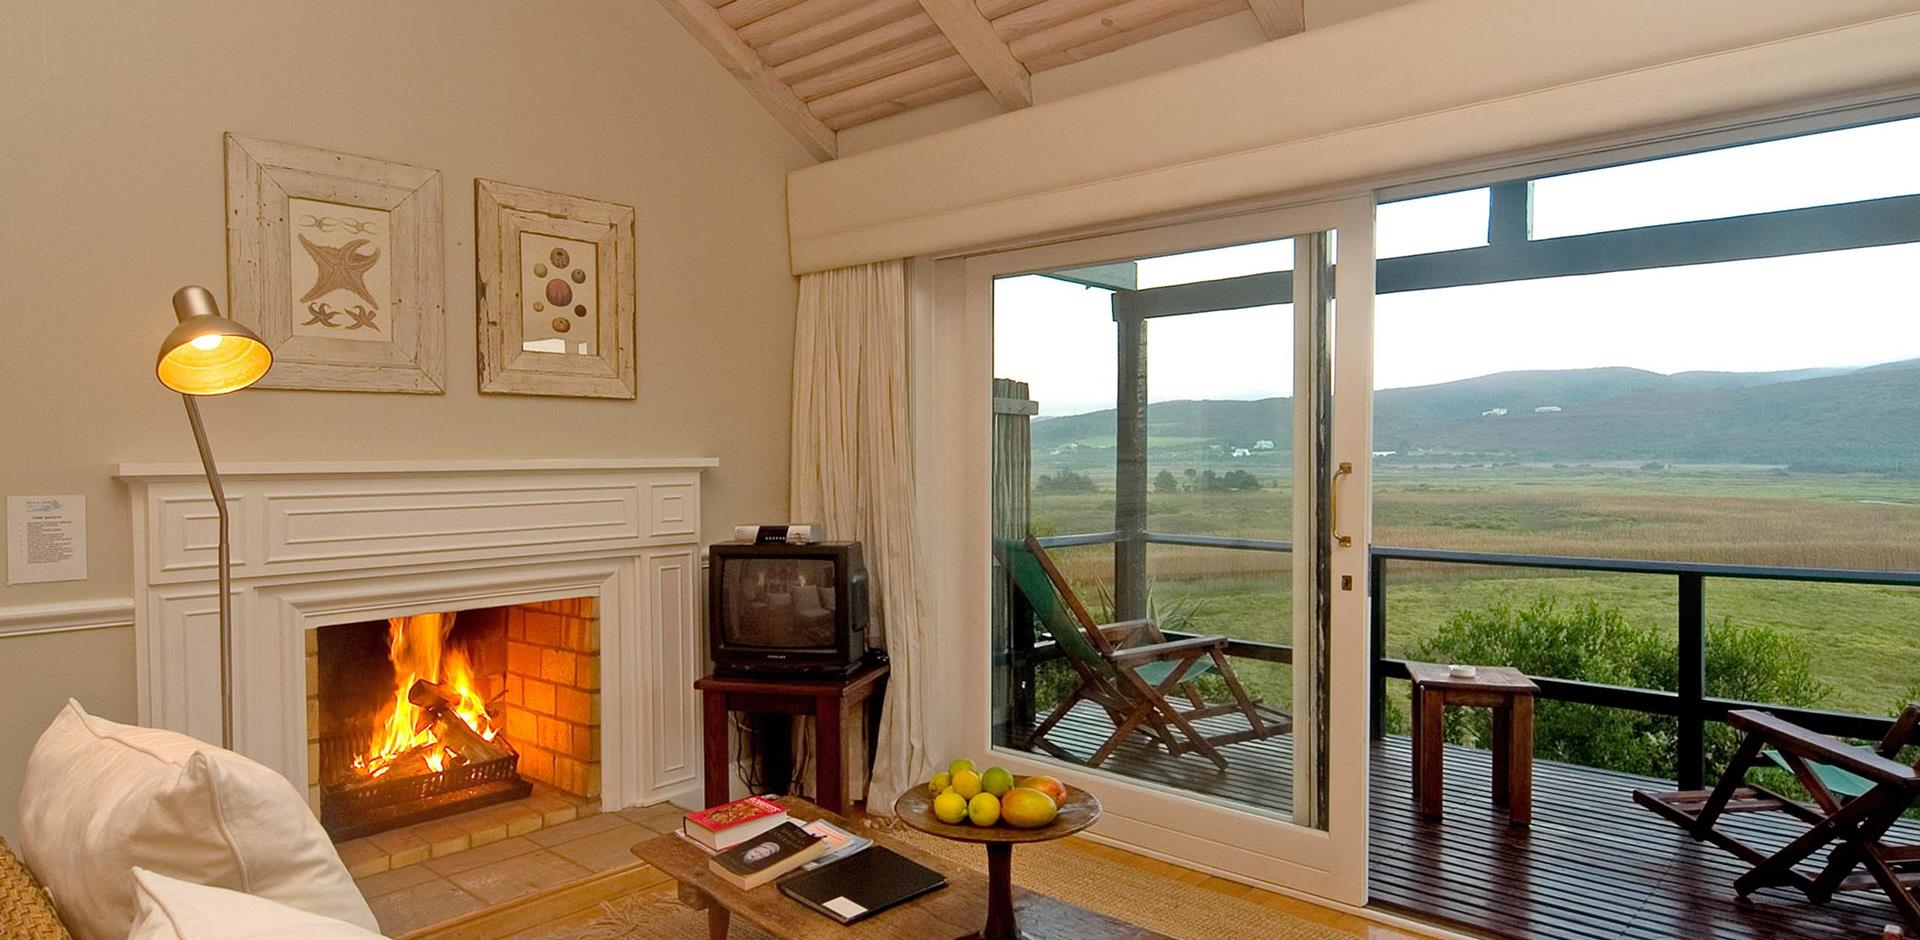 Interior, Emily Moon River Lodge, South Africa, A&K